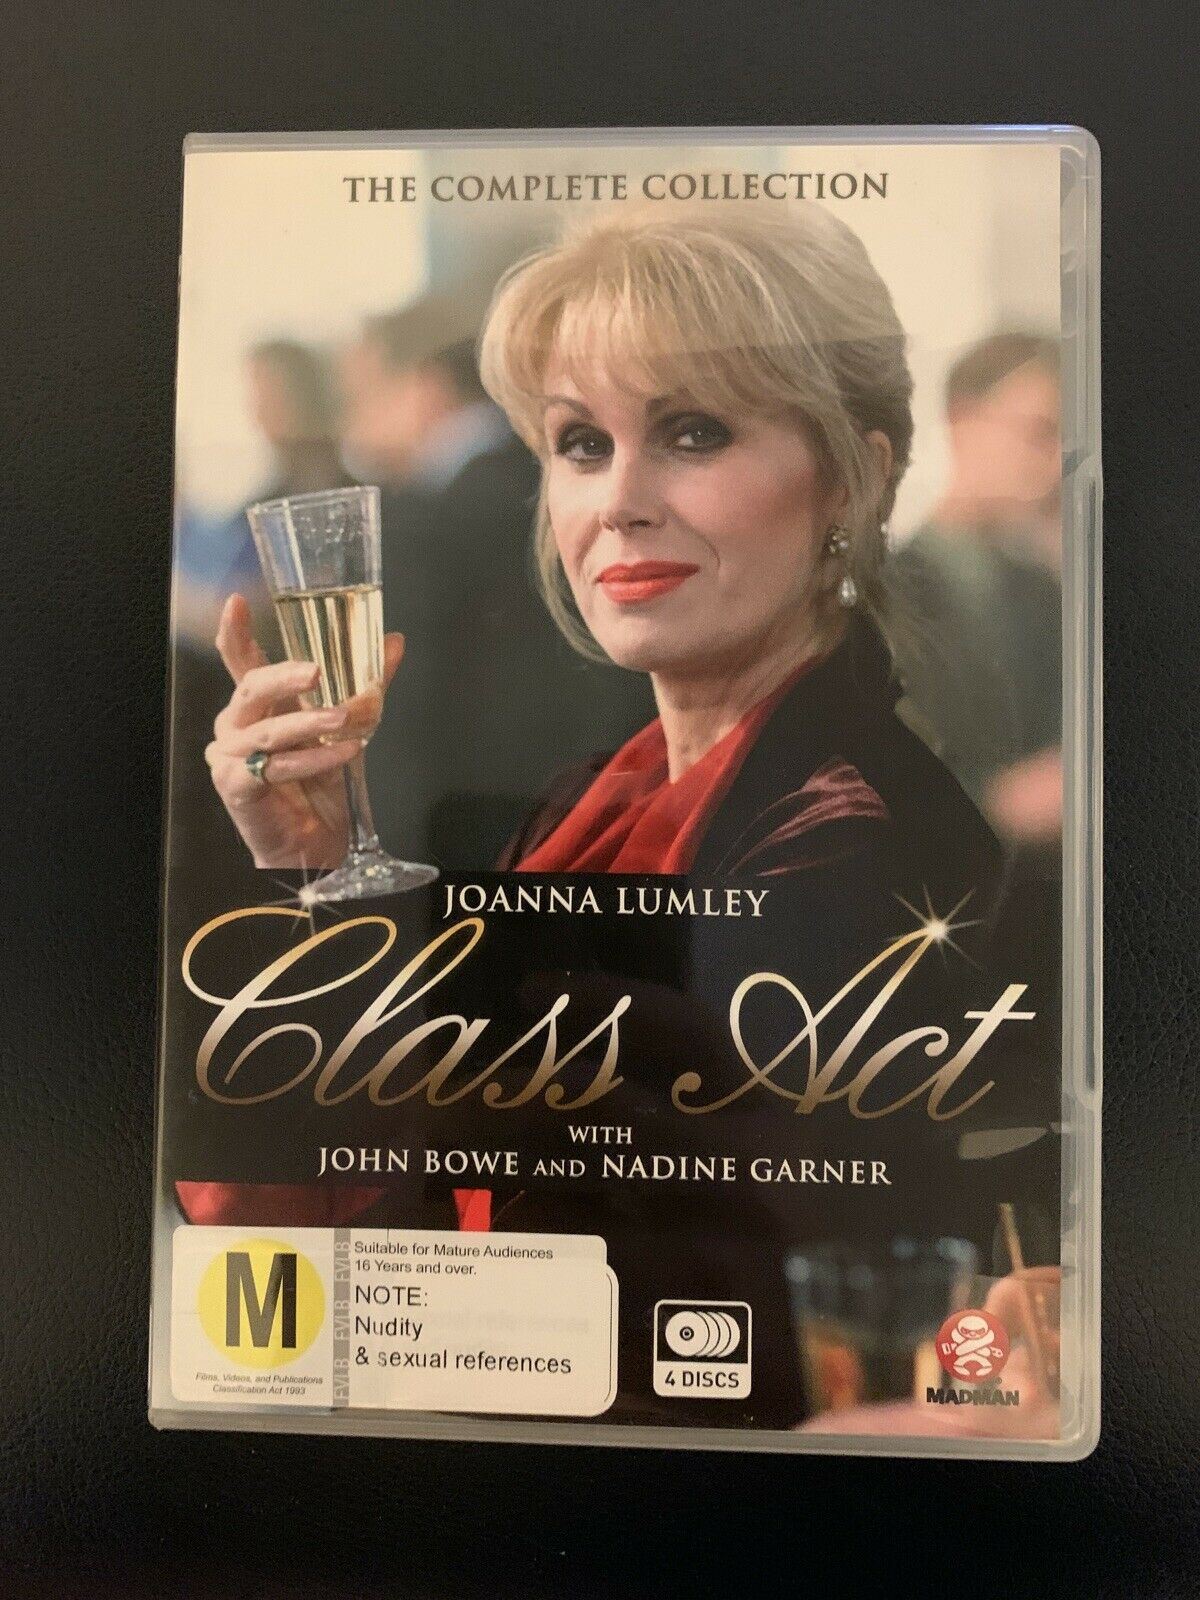 Class Act - The Complete Collection (DVD, 1994, 4-Disc) Joanna Lumley - Region 4